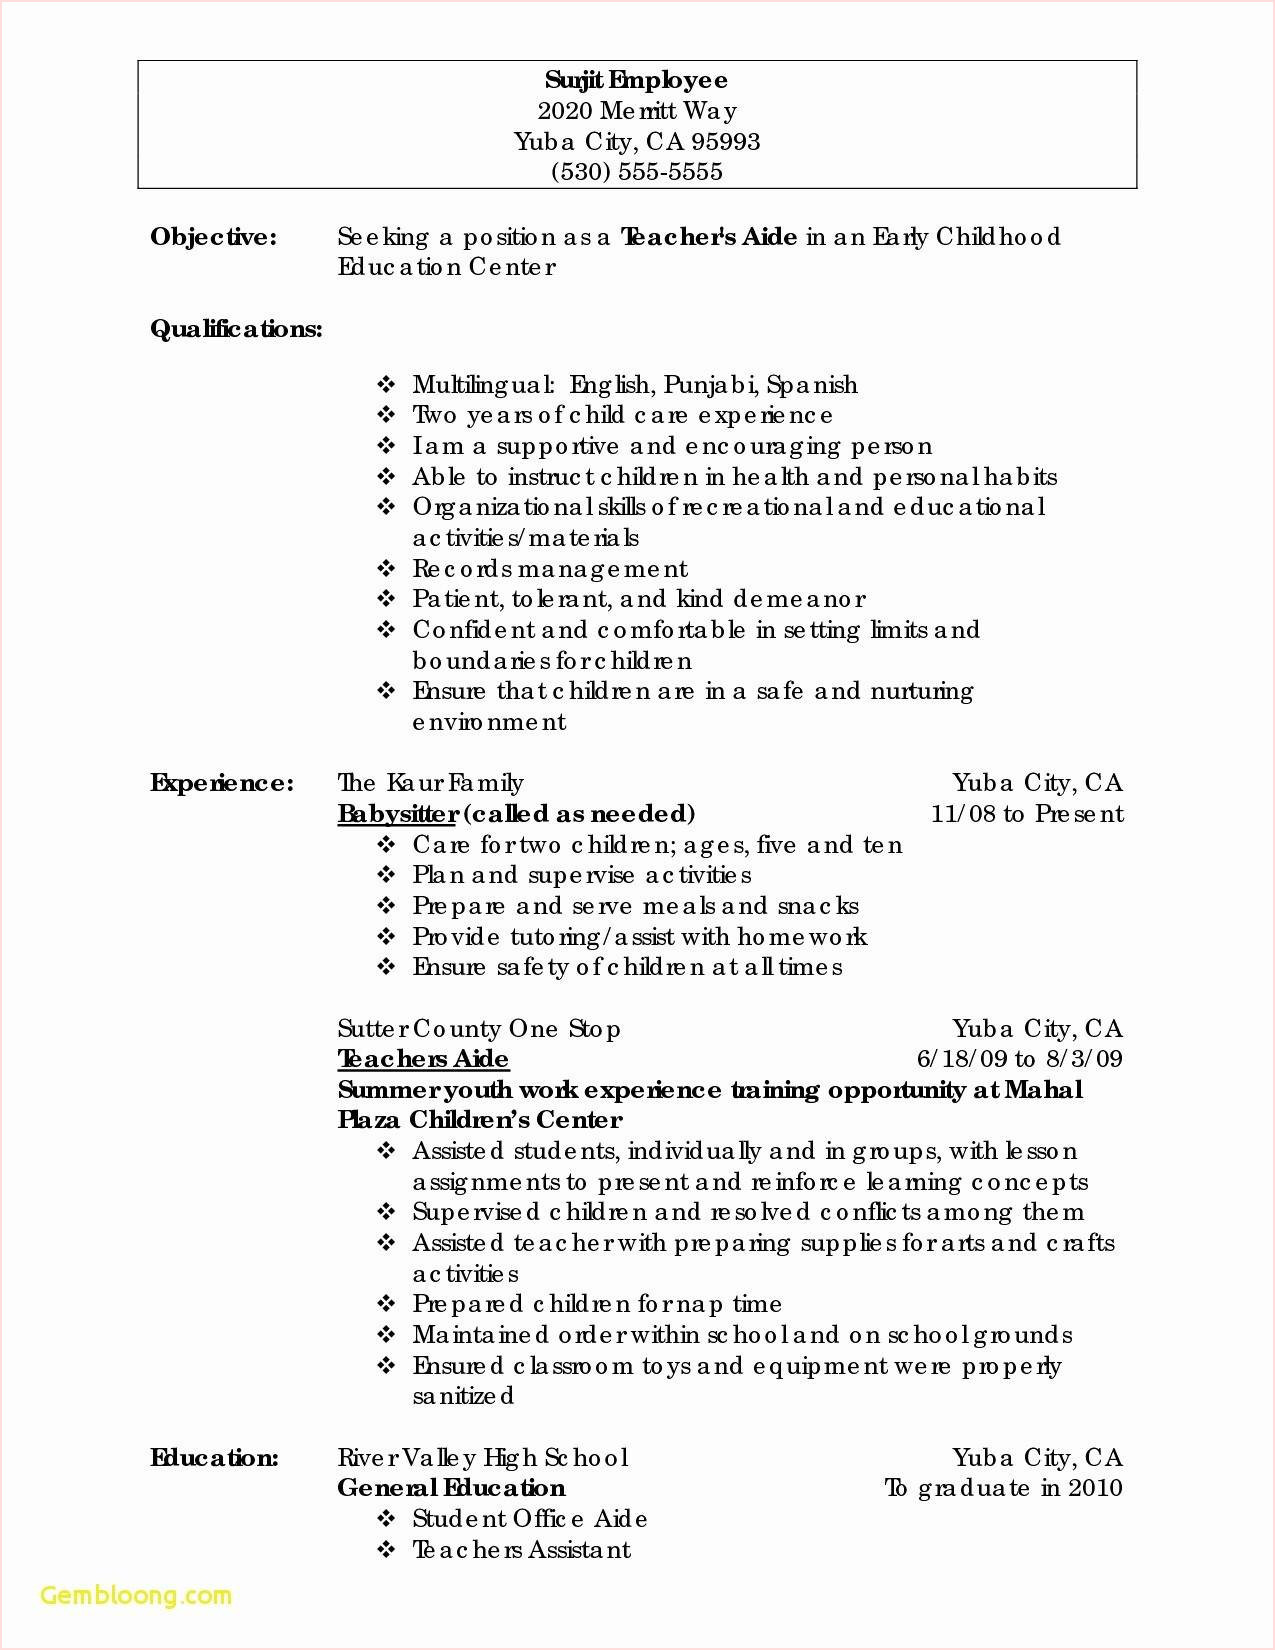 High School Student Resume Highschool Resume Template Free Resume Examples For High School Students Resume Worksheet For Of Highschool Resume Template high school student resume|wikiresume.com